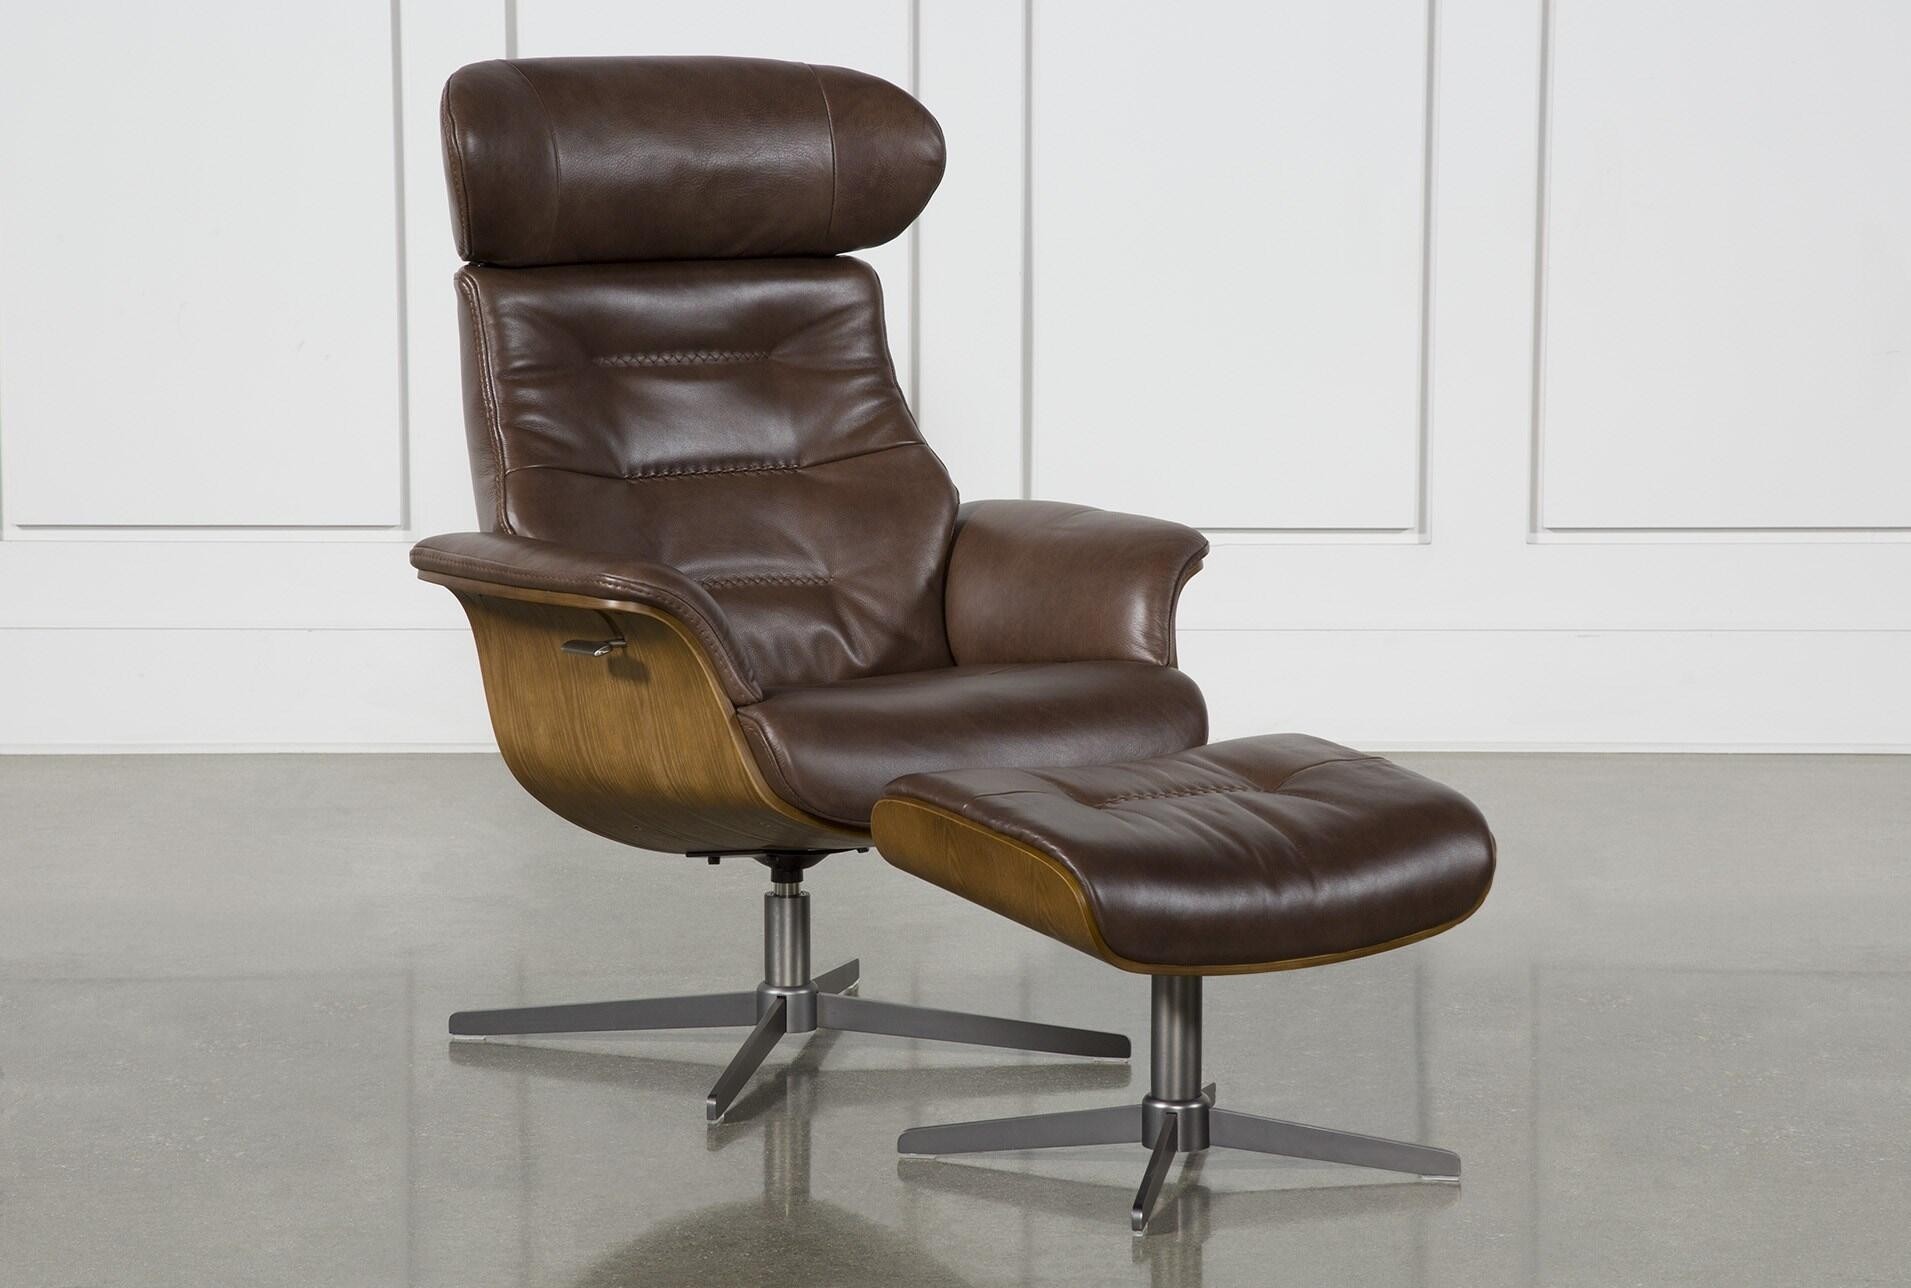 Amala brown leather reclining swivel chair with adjustable